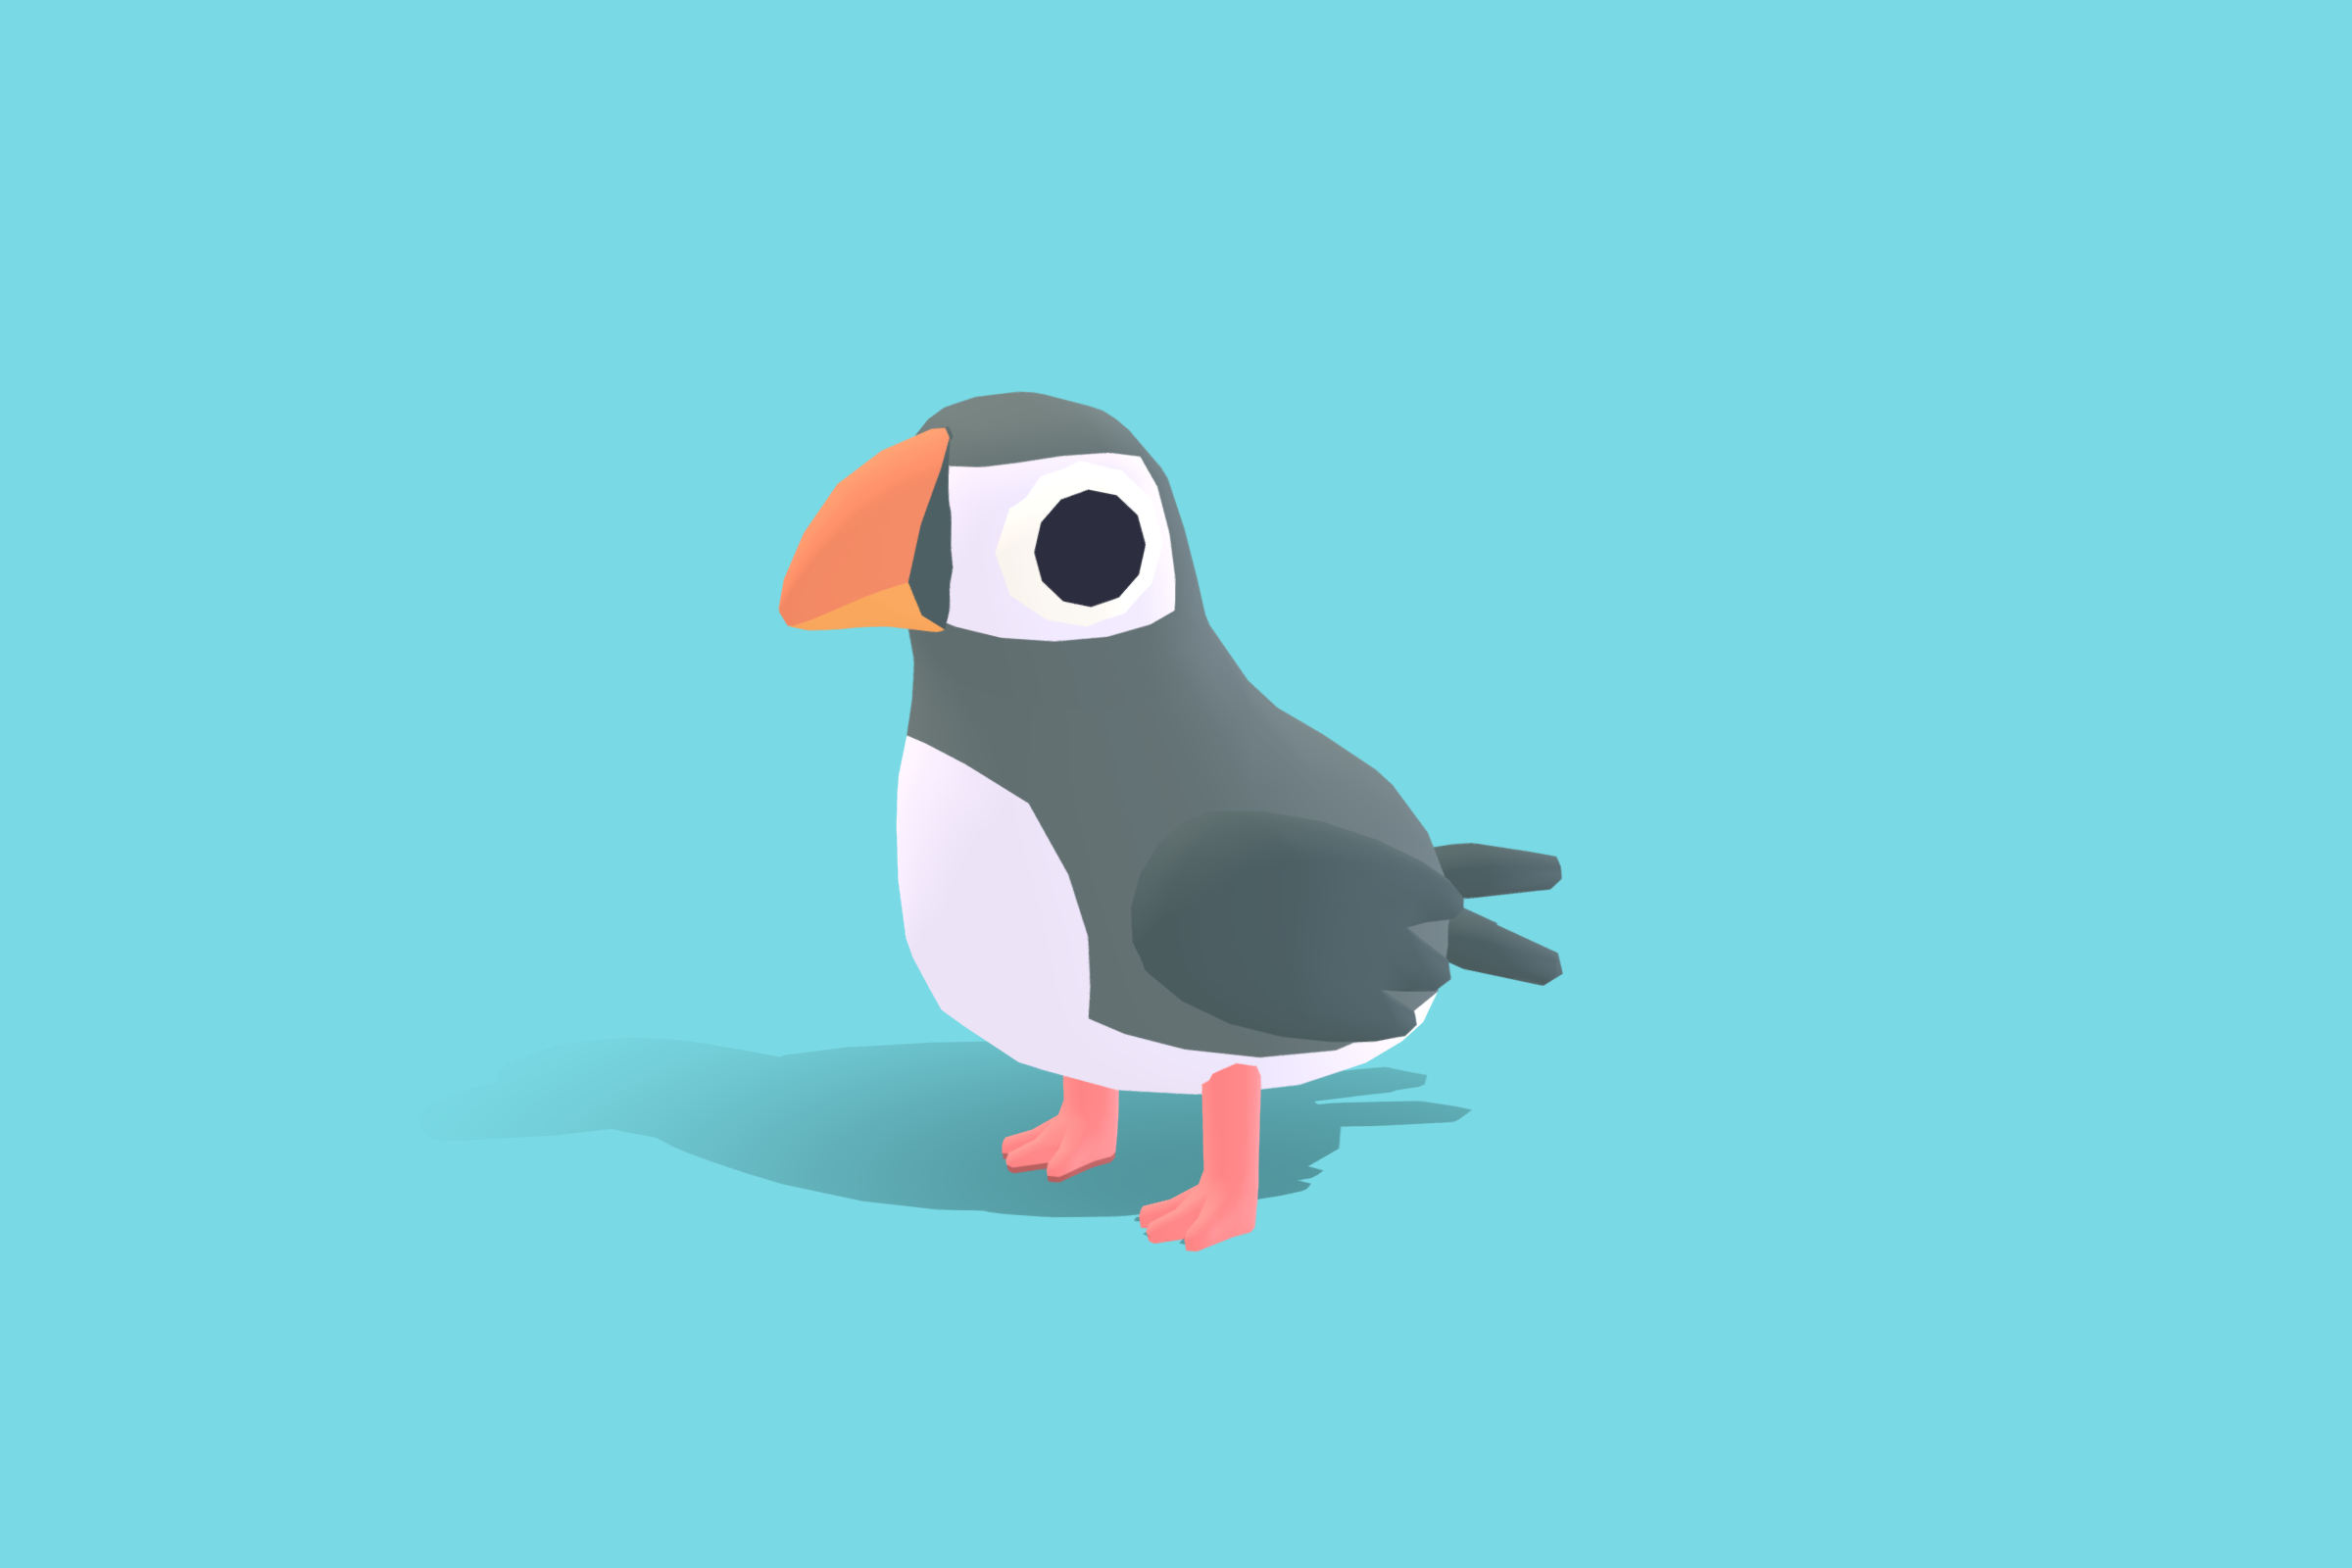 Piff the Puffin - Quirky Series | Omabuarts Studio